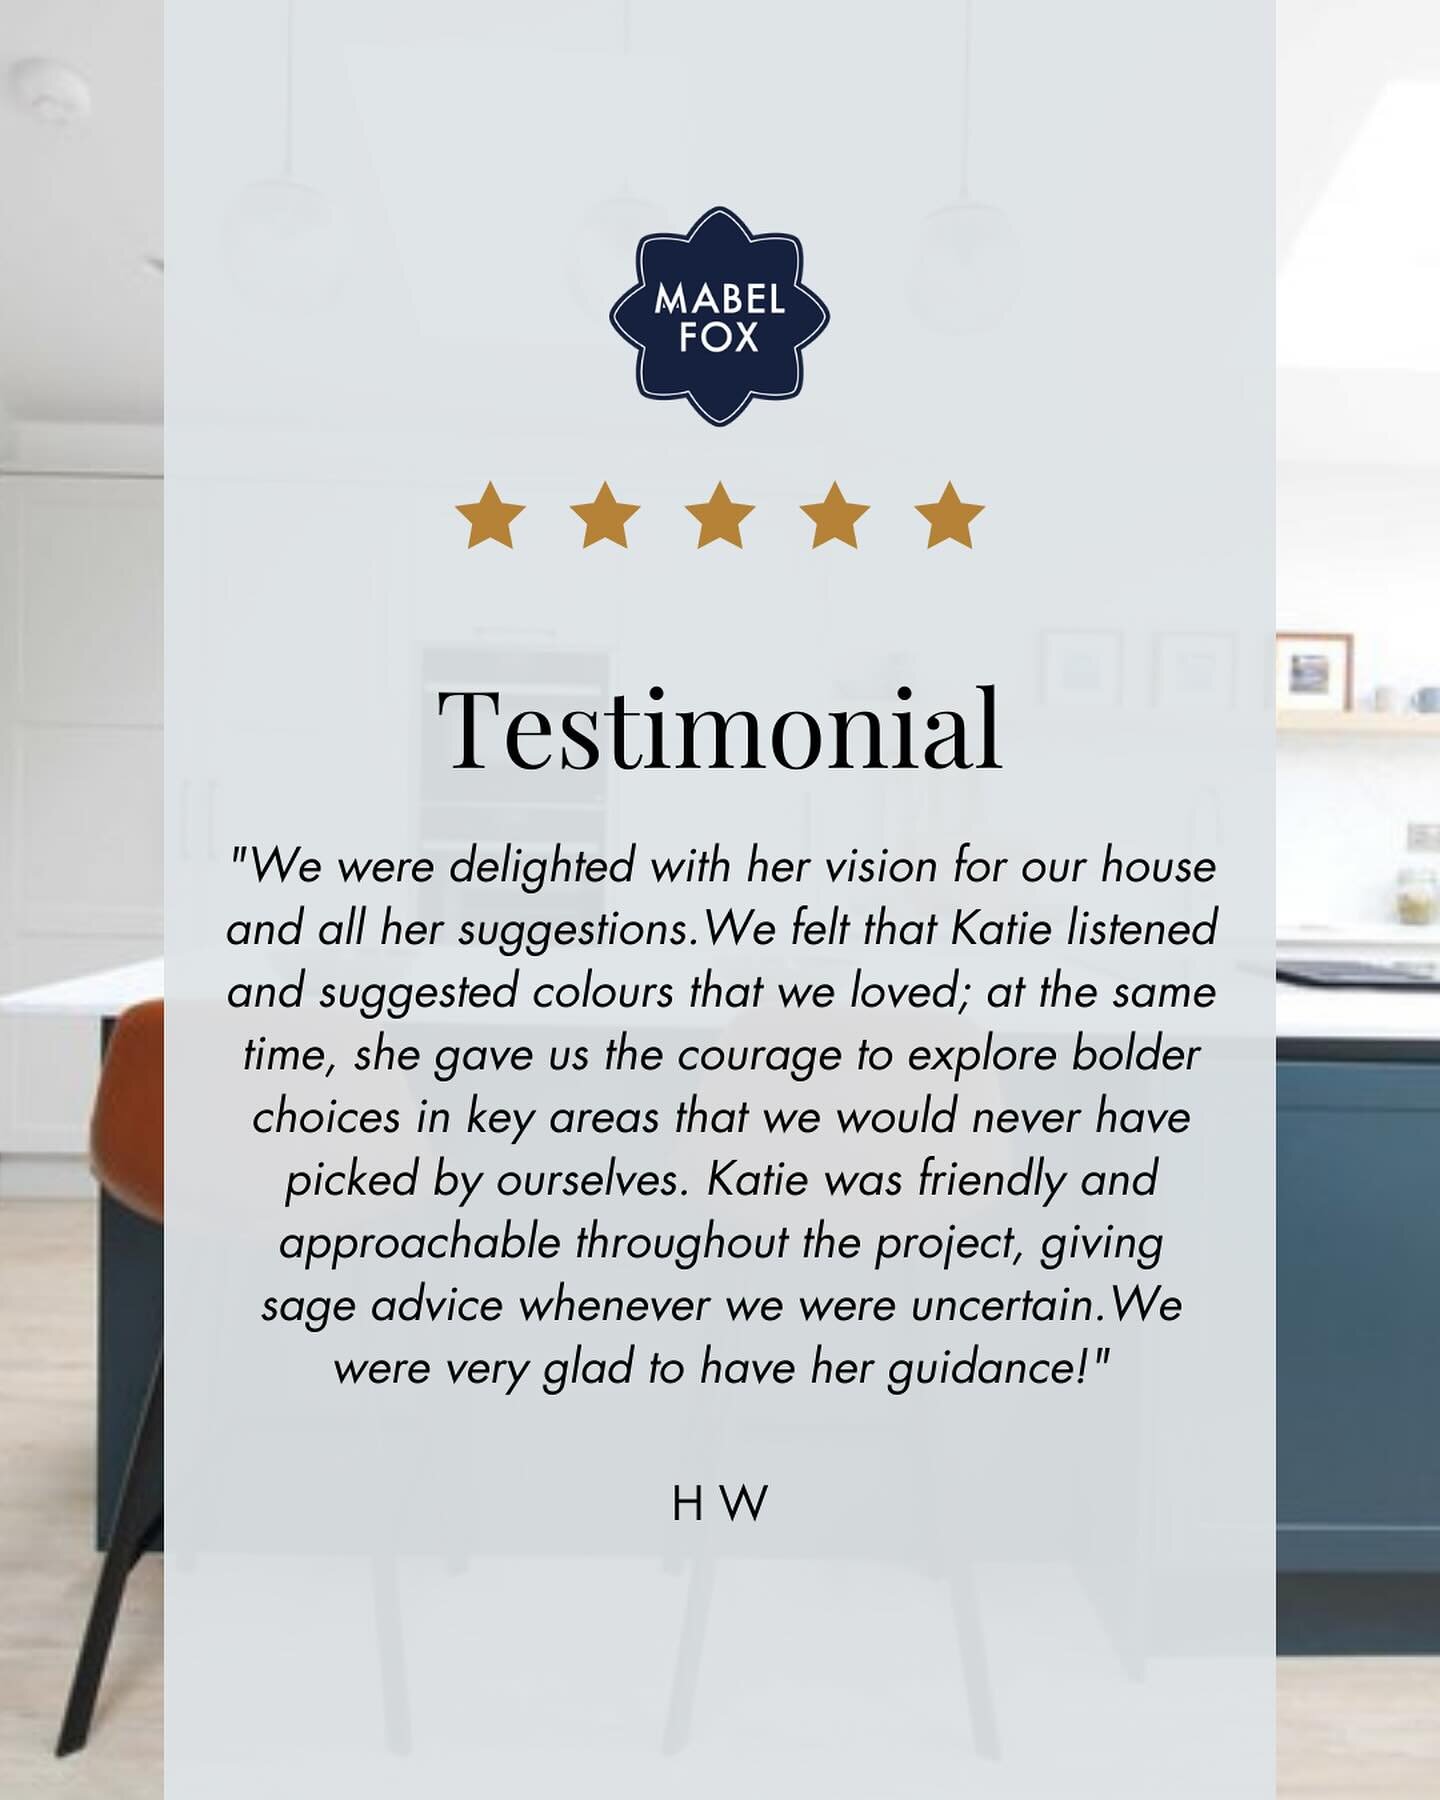 Nothing beats seeing clients enjoy our finished design; it makes all our hard work worthwhile. 

Our aim for this project was to design a cosy, cohesive family area that felt warm and connected, while maximising the property&rsquo;s natural light. 

